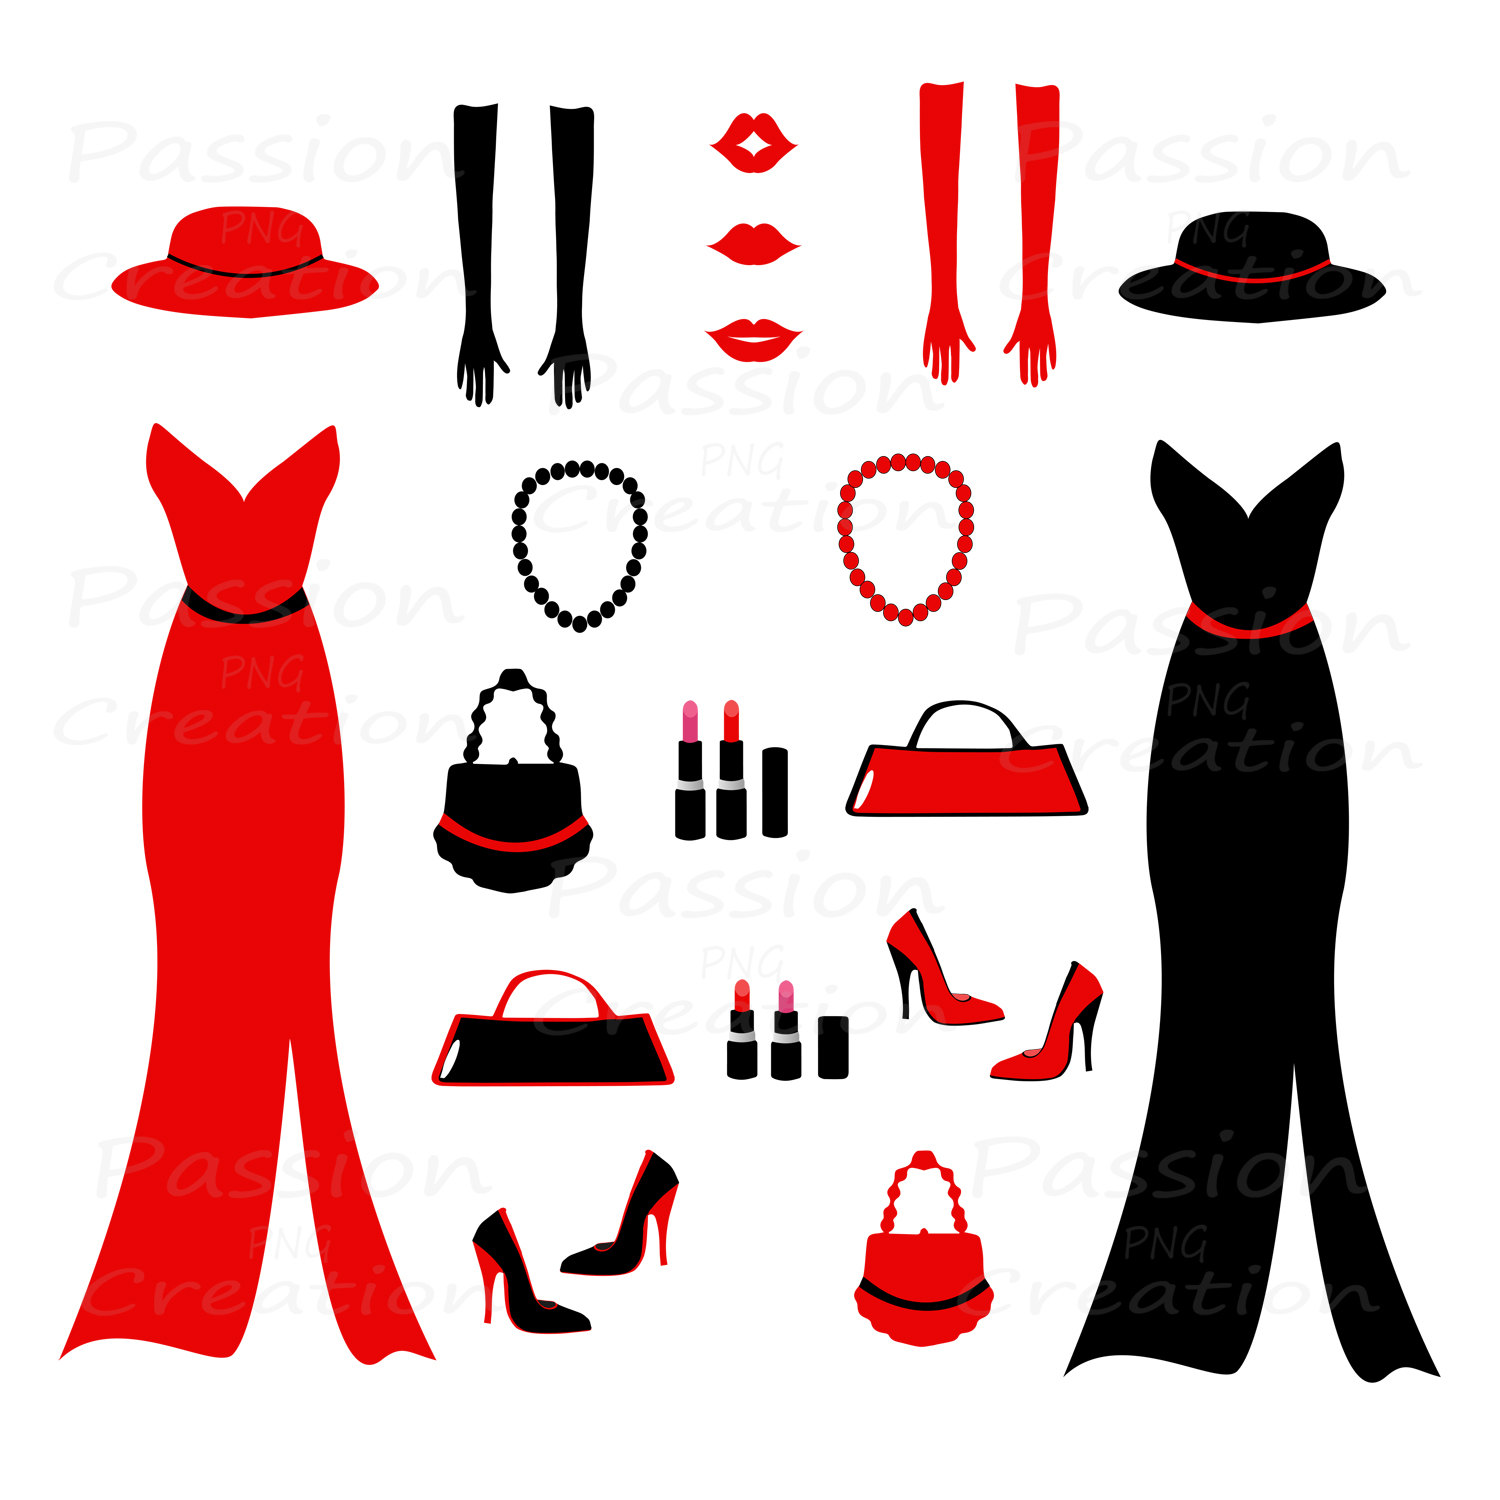 Fashion clip art borders free clipart images 9